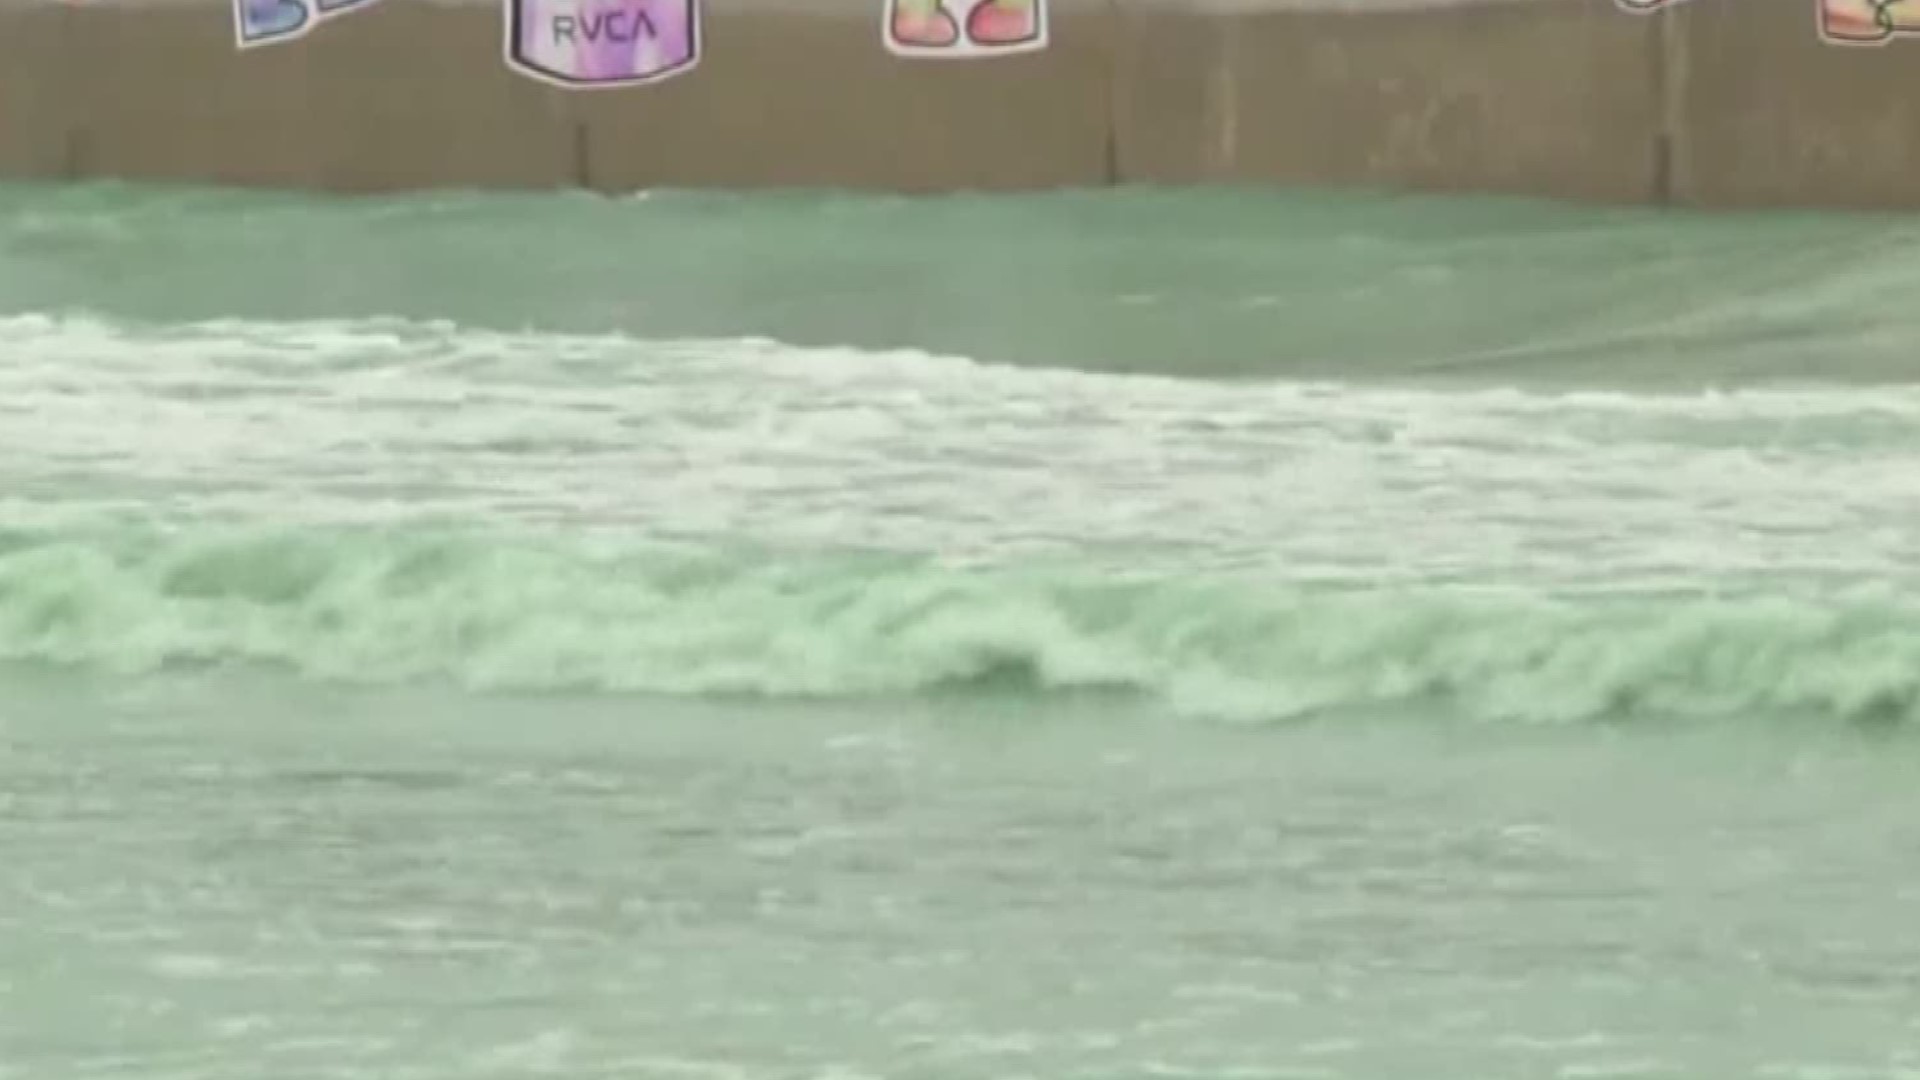 Man pulled from BSR wave pool dies
The McLennan County Sheriff's Office confirmed a man passed away after being pulled from the wave pool at BSR Cable Park.